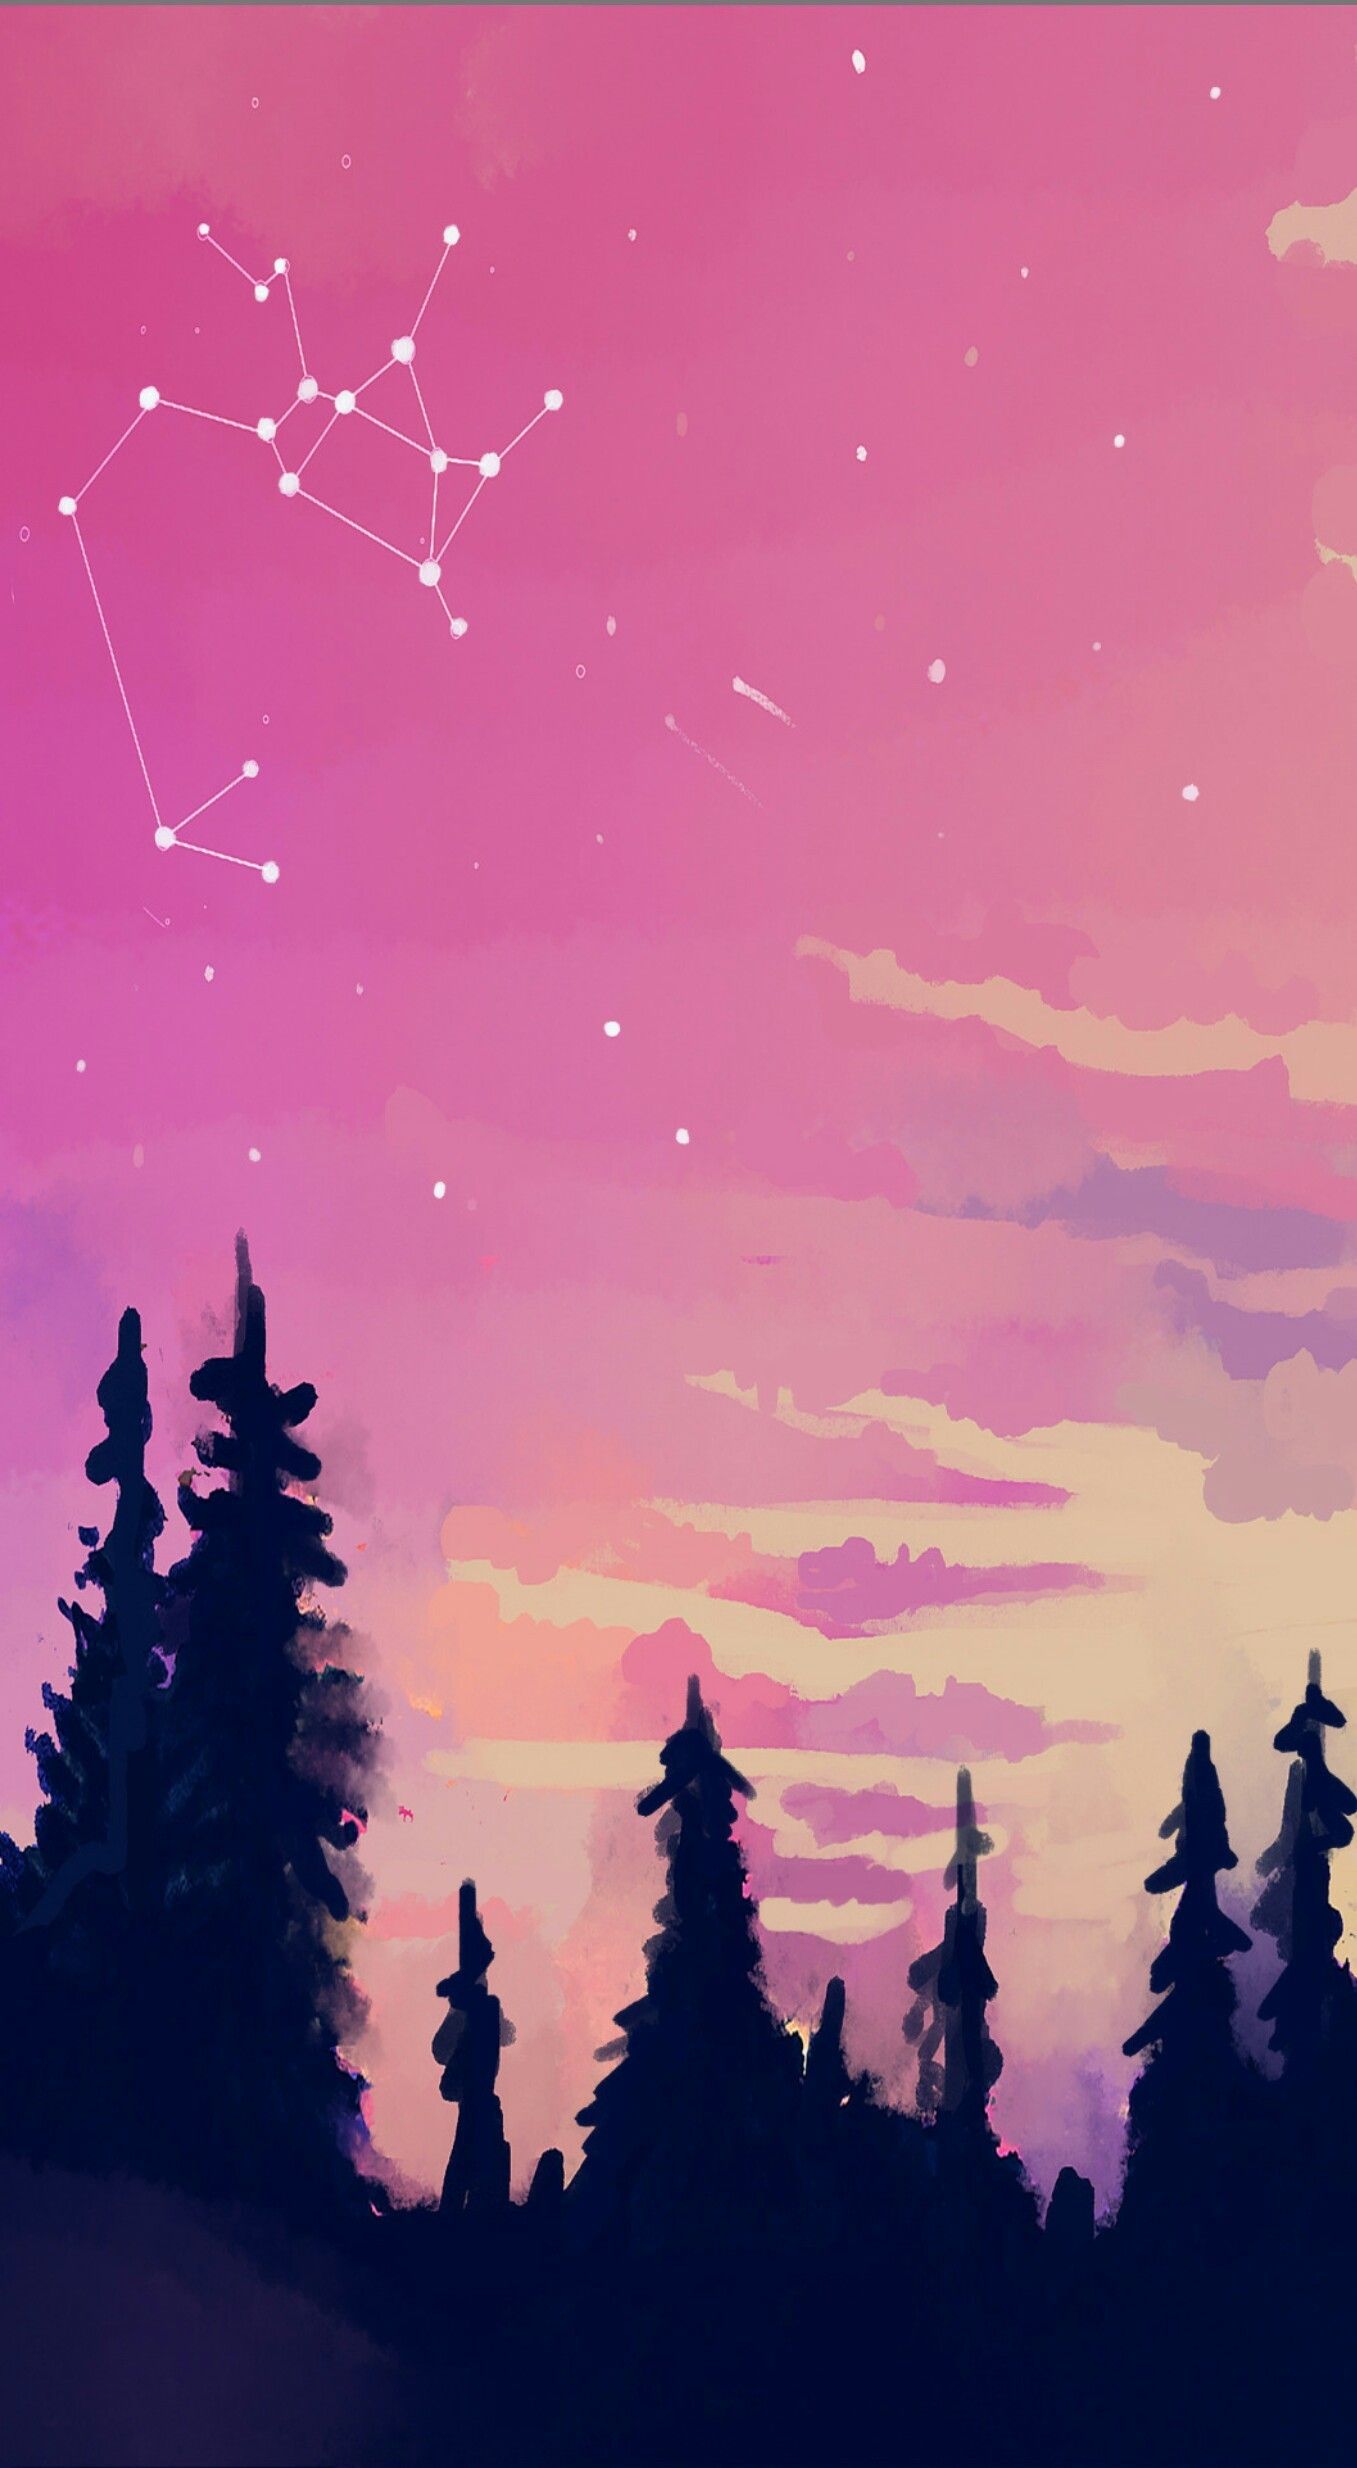 A painting of a pink and purple sky with stars and a constellation. - Constellation, art, Taurus